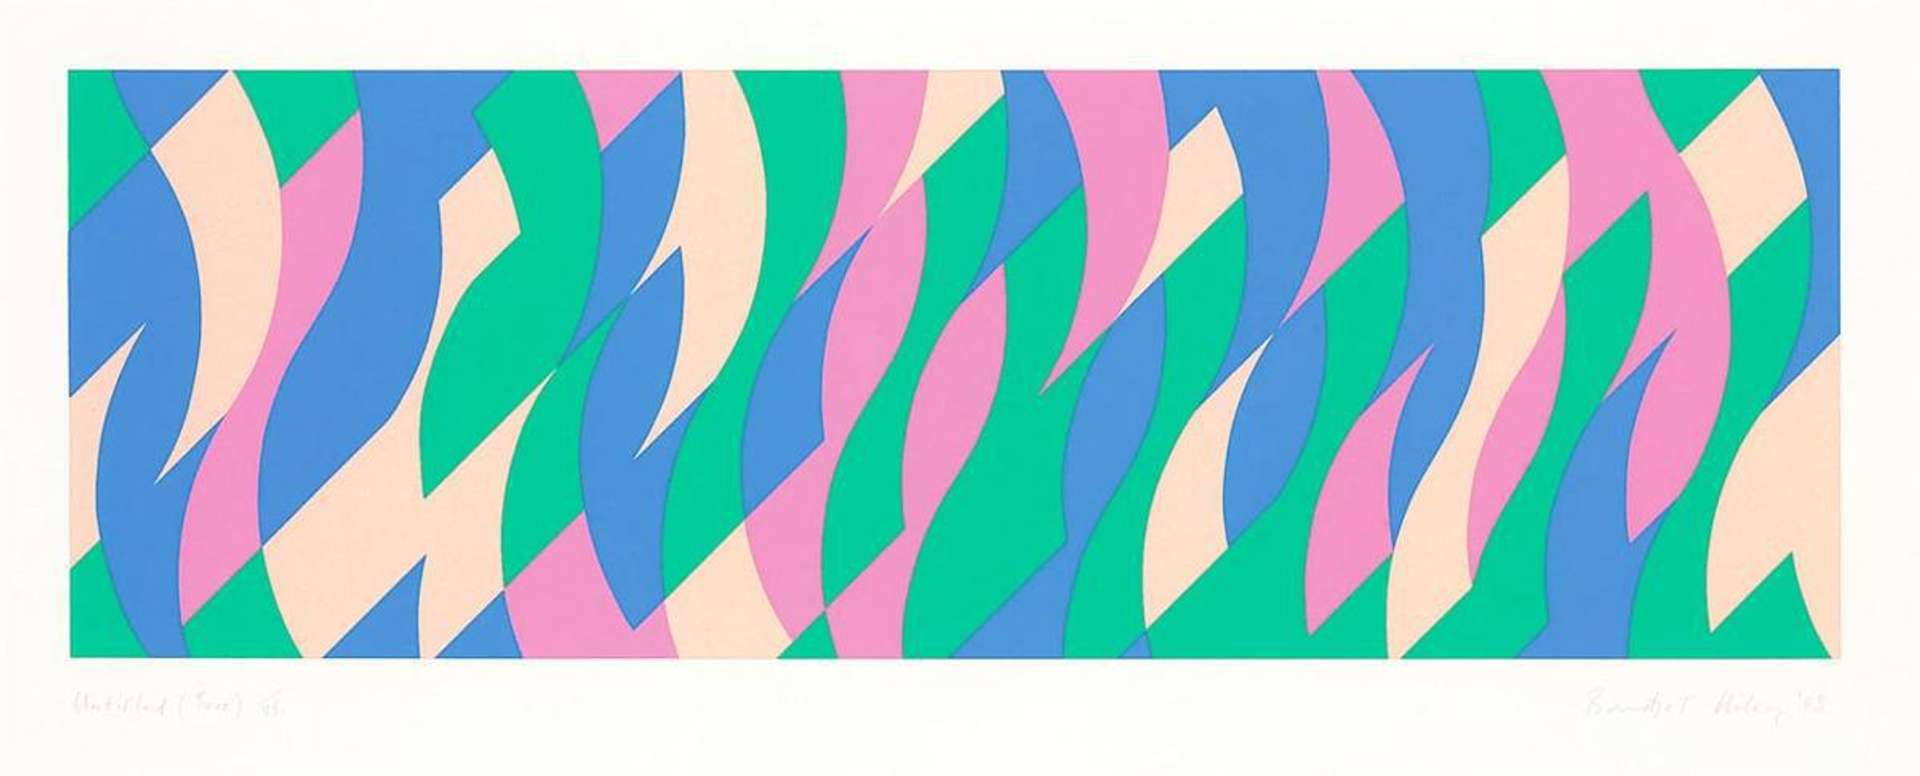 Still geometric shapes illustrating the optical illusion of movement through muted tones of pink, blue, and green.